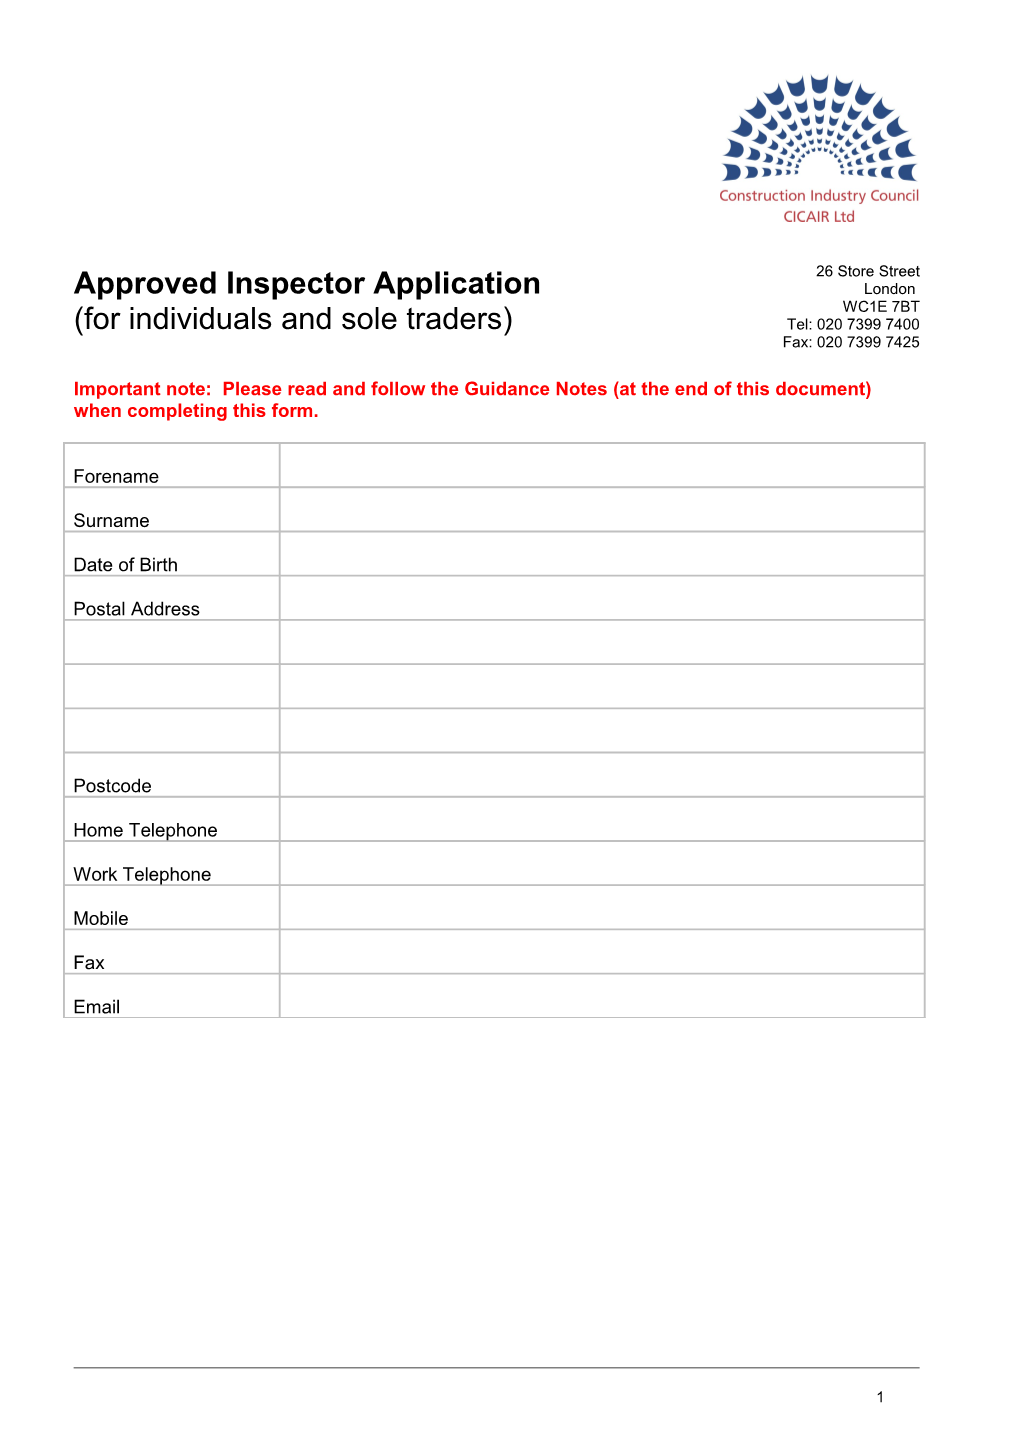 Approved Inspector Application